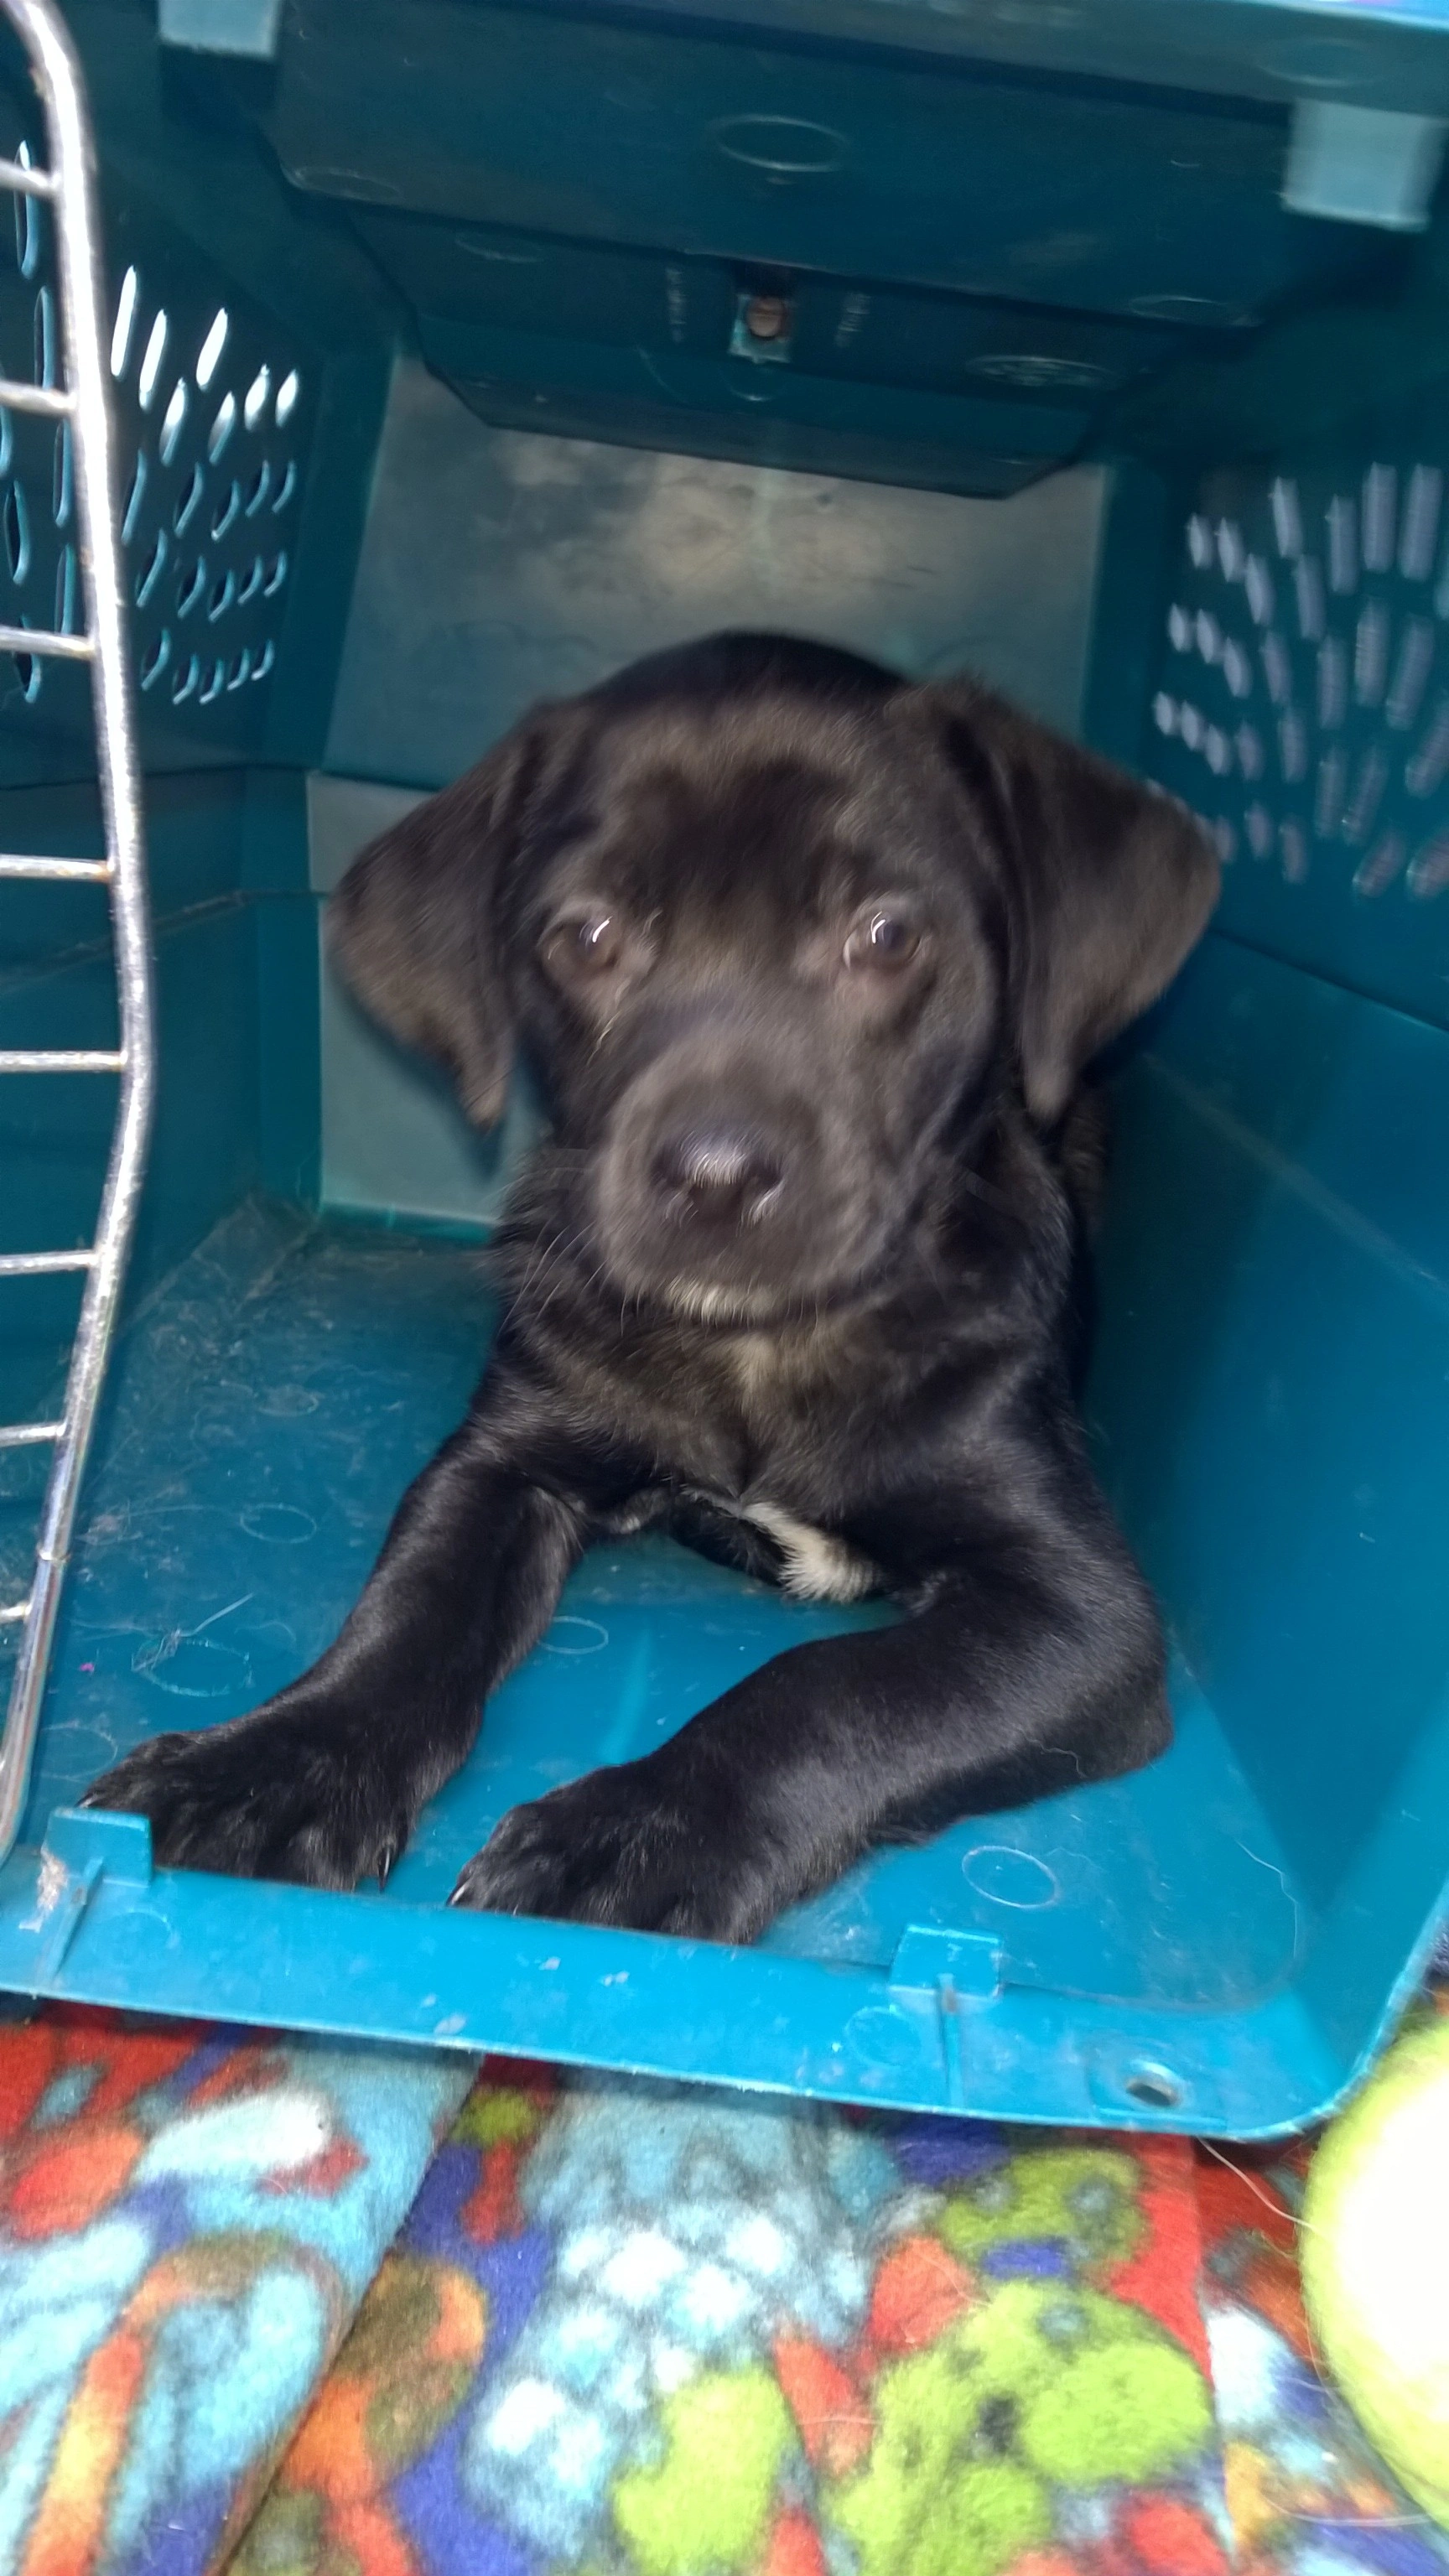 Zoe in her adoption and training crate